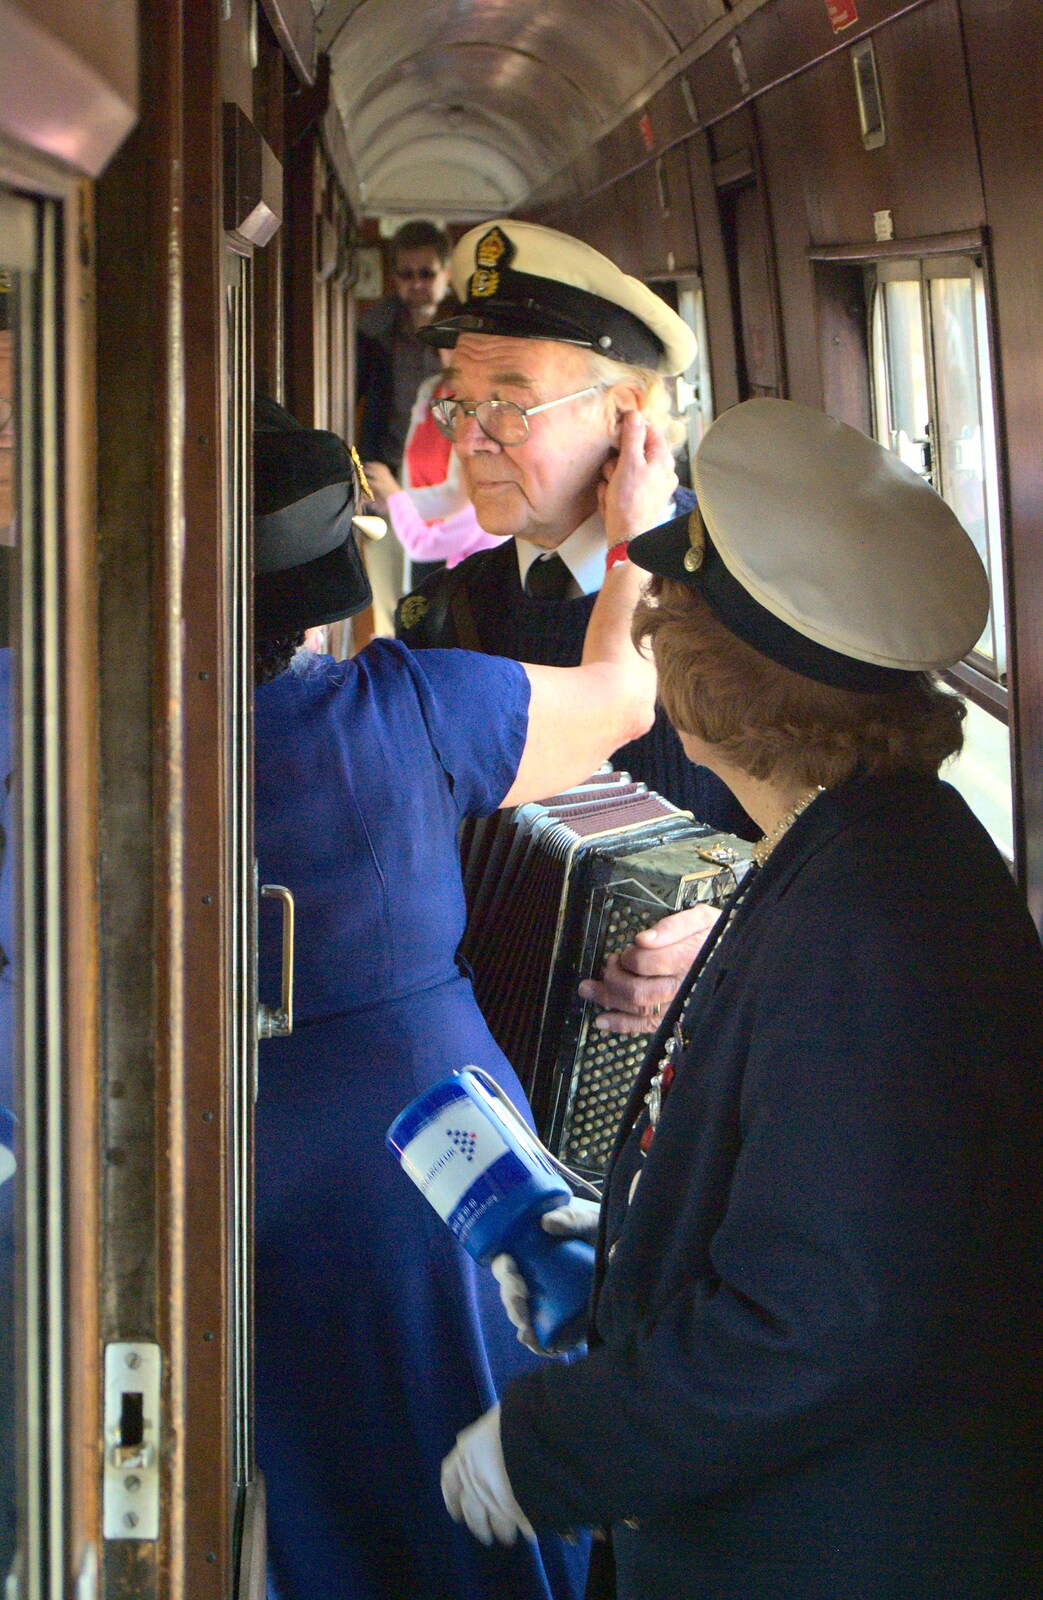 An accordion player does a tour of the carriages from The 1940s Steam Train Weekend, Holt, Norfolk - 18th September 2011